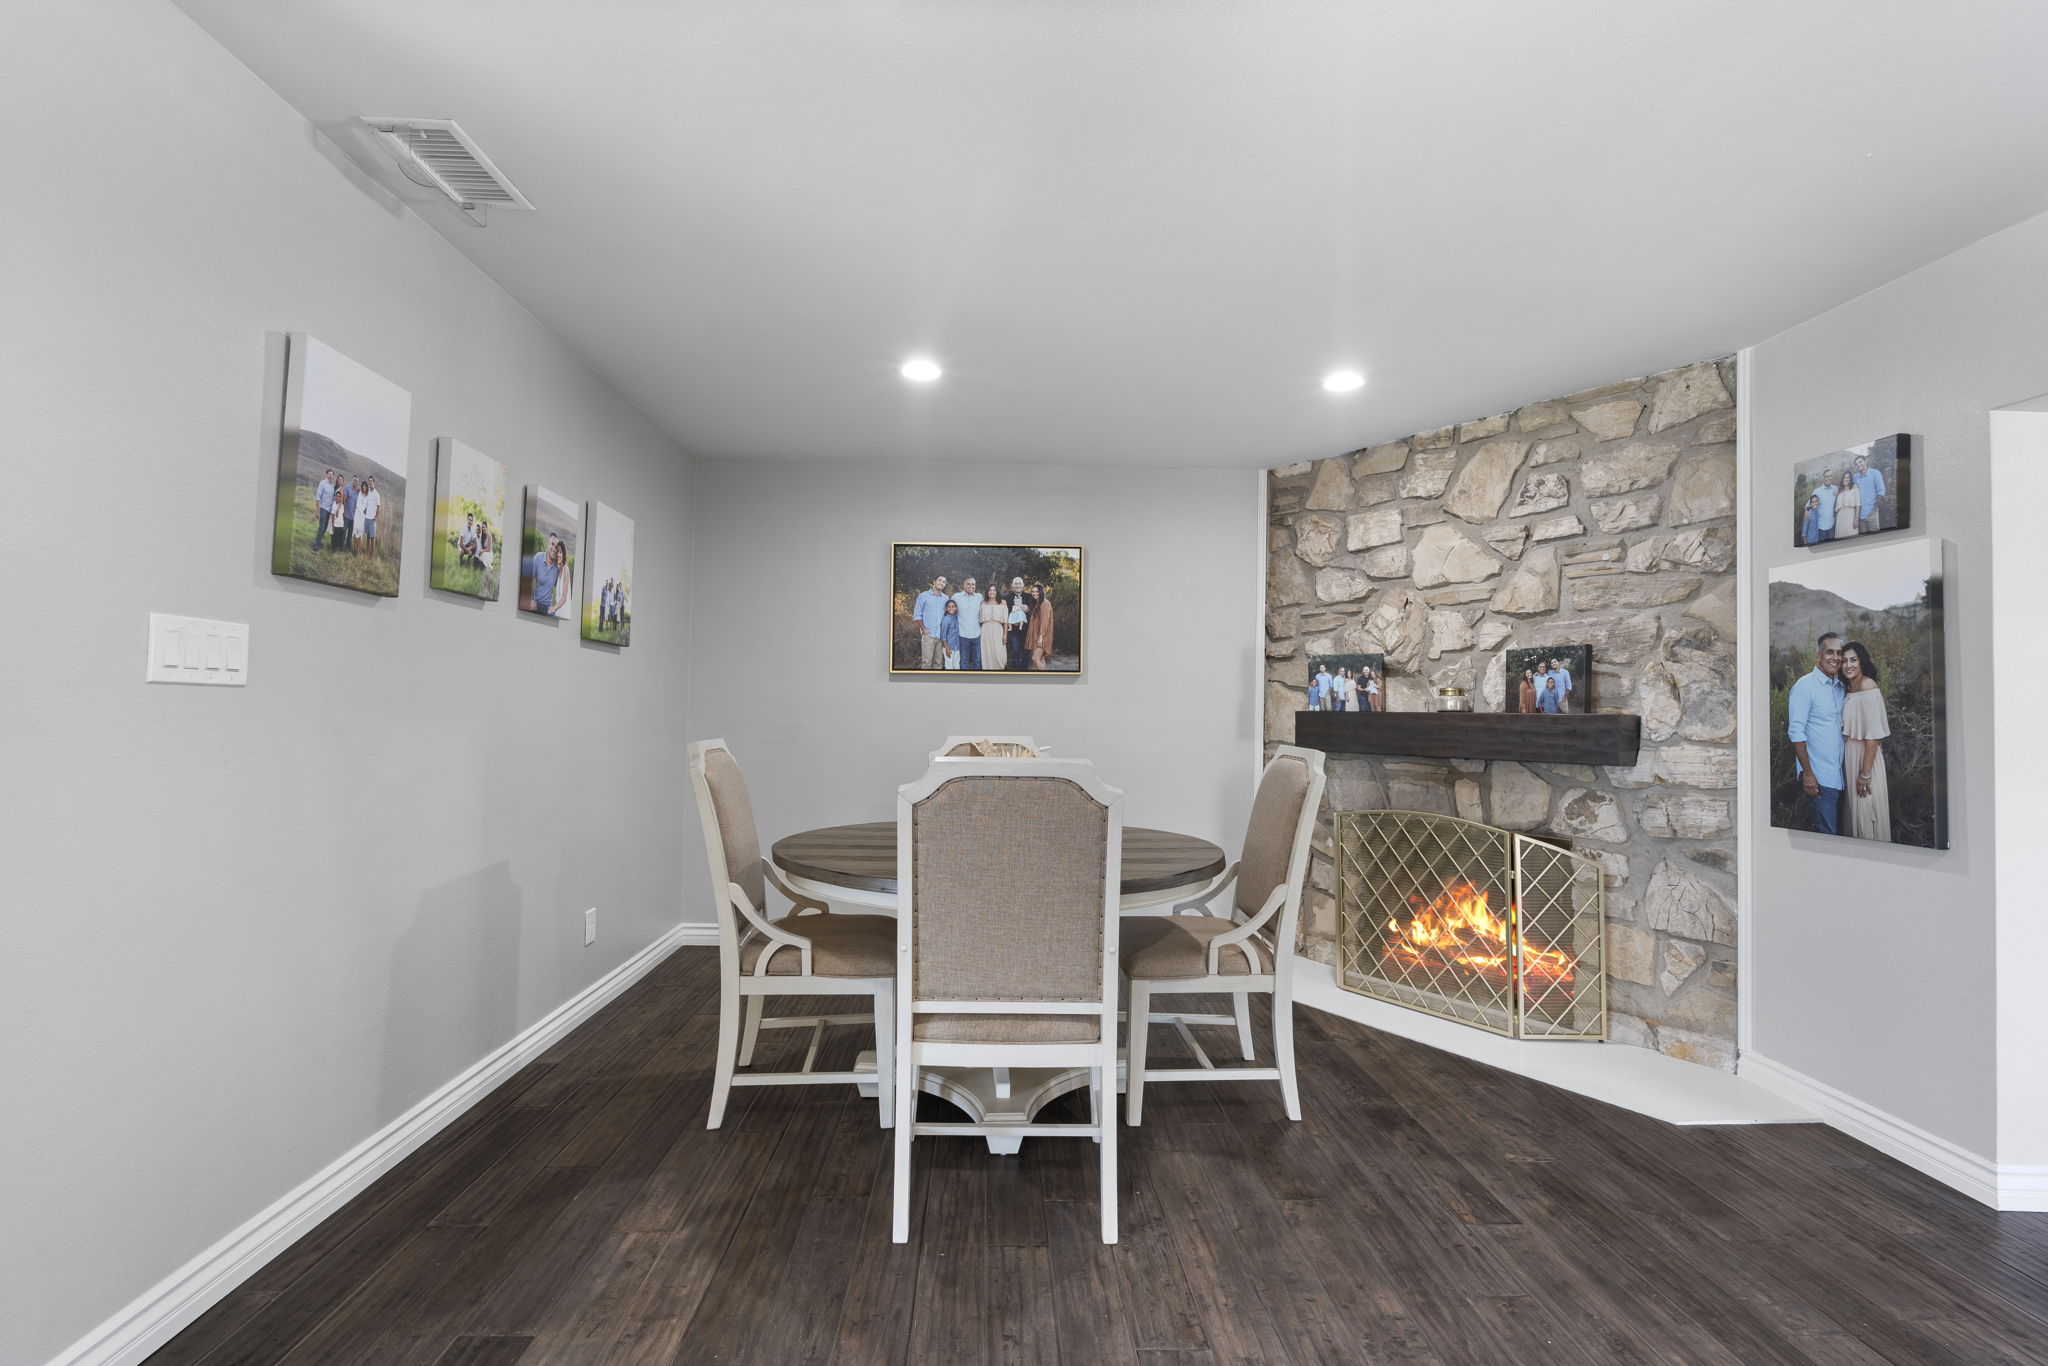 Inviting dining space with fireplace